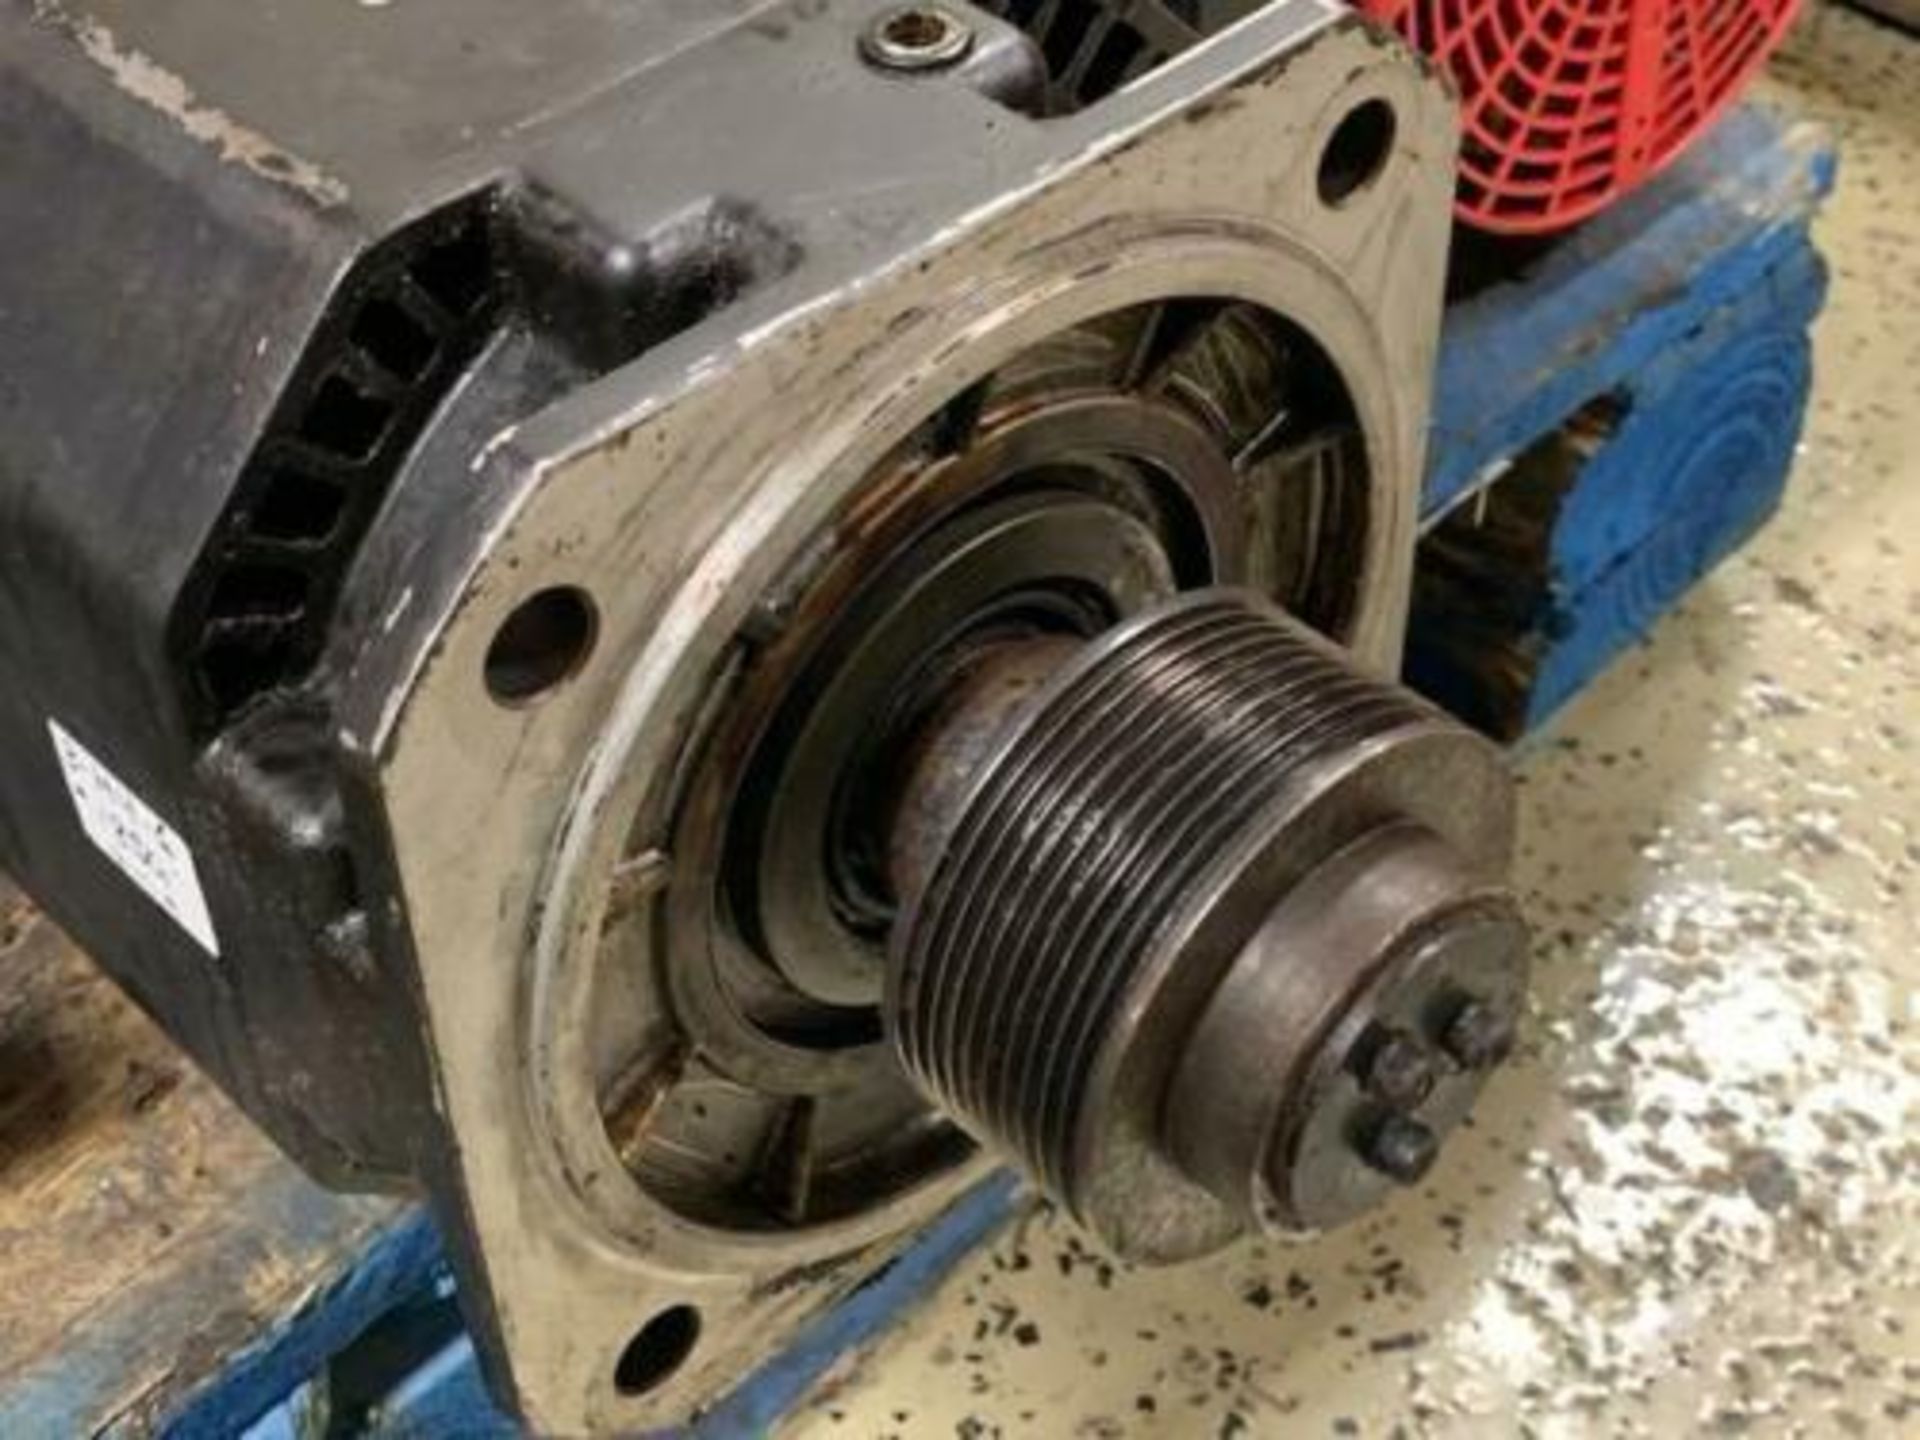 Fanuc #A06B-0854-B100-R Spindle Motor - Image 2 of 6